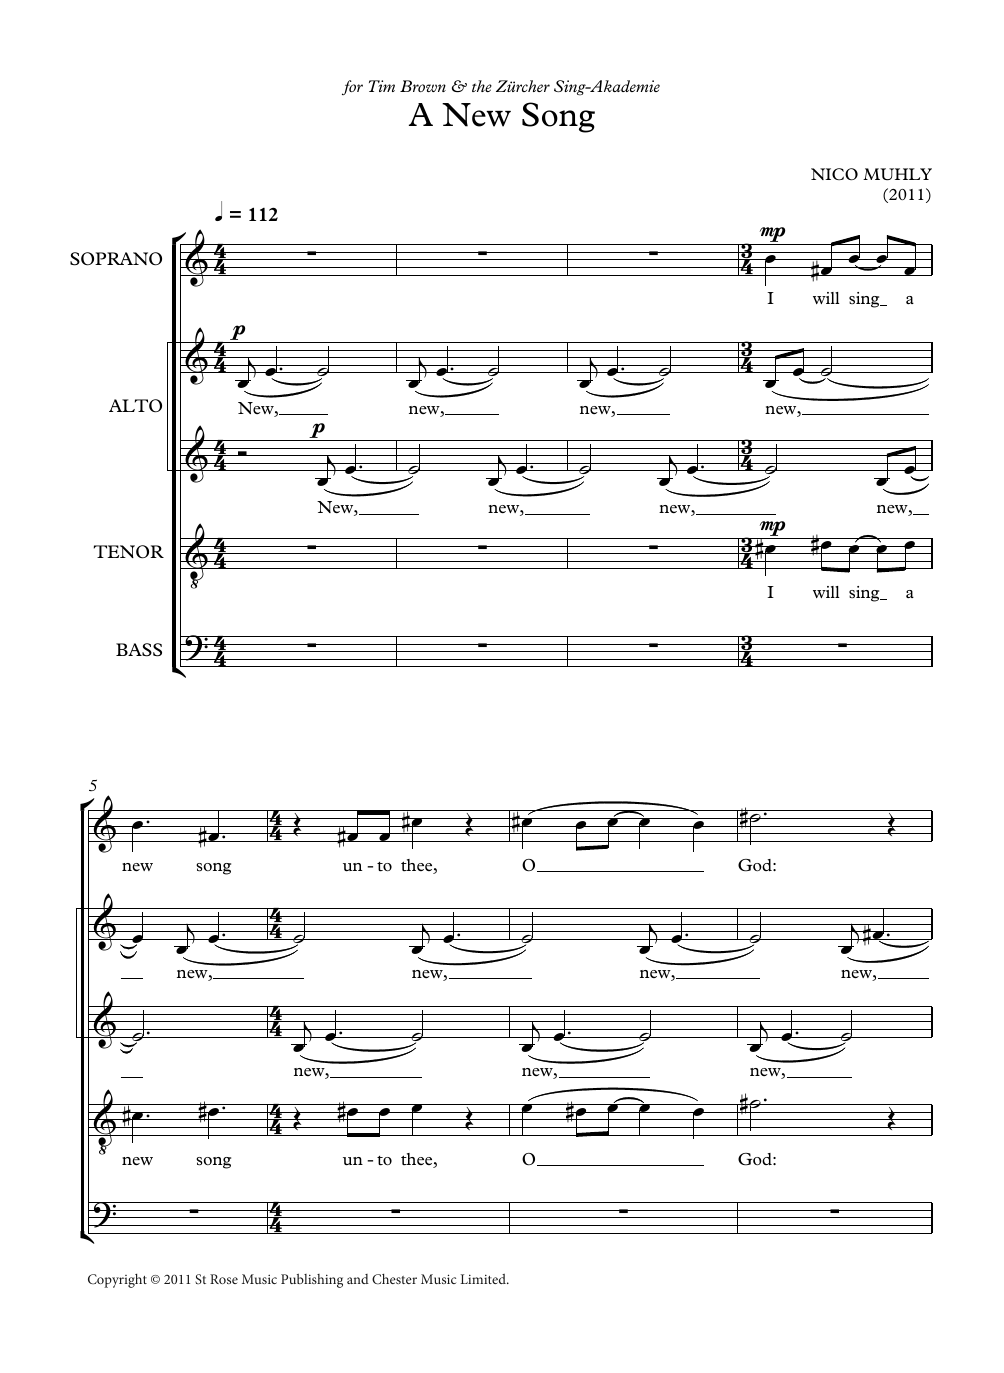 Download Nico Muhly A New Song Sheet Music